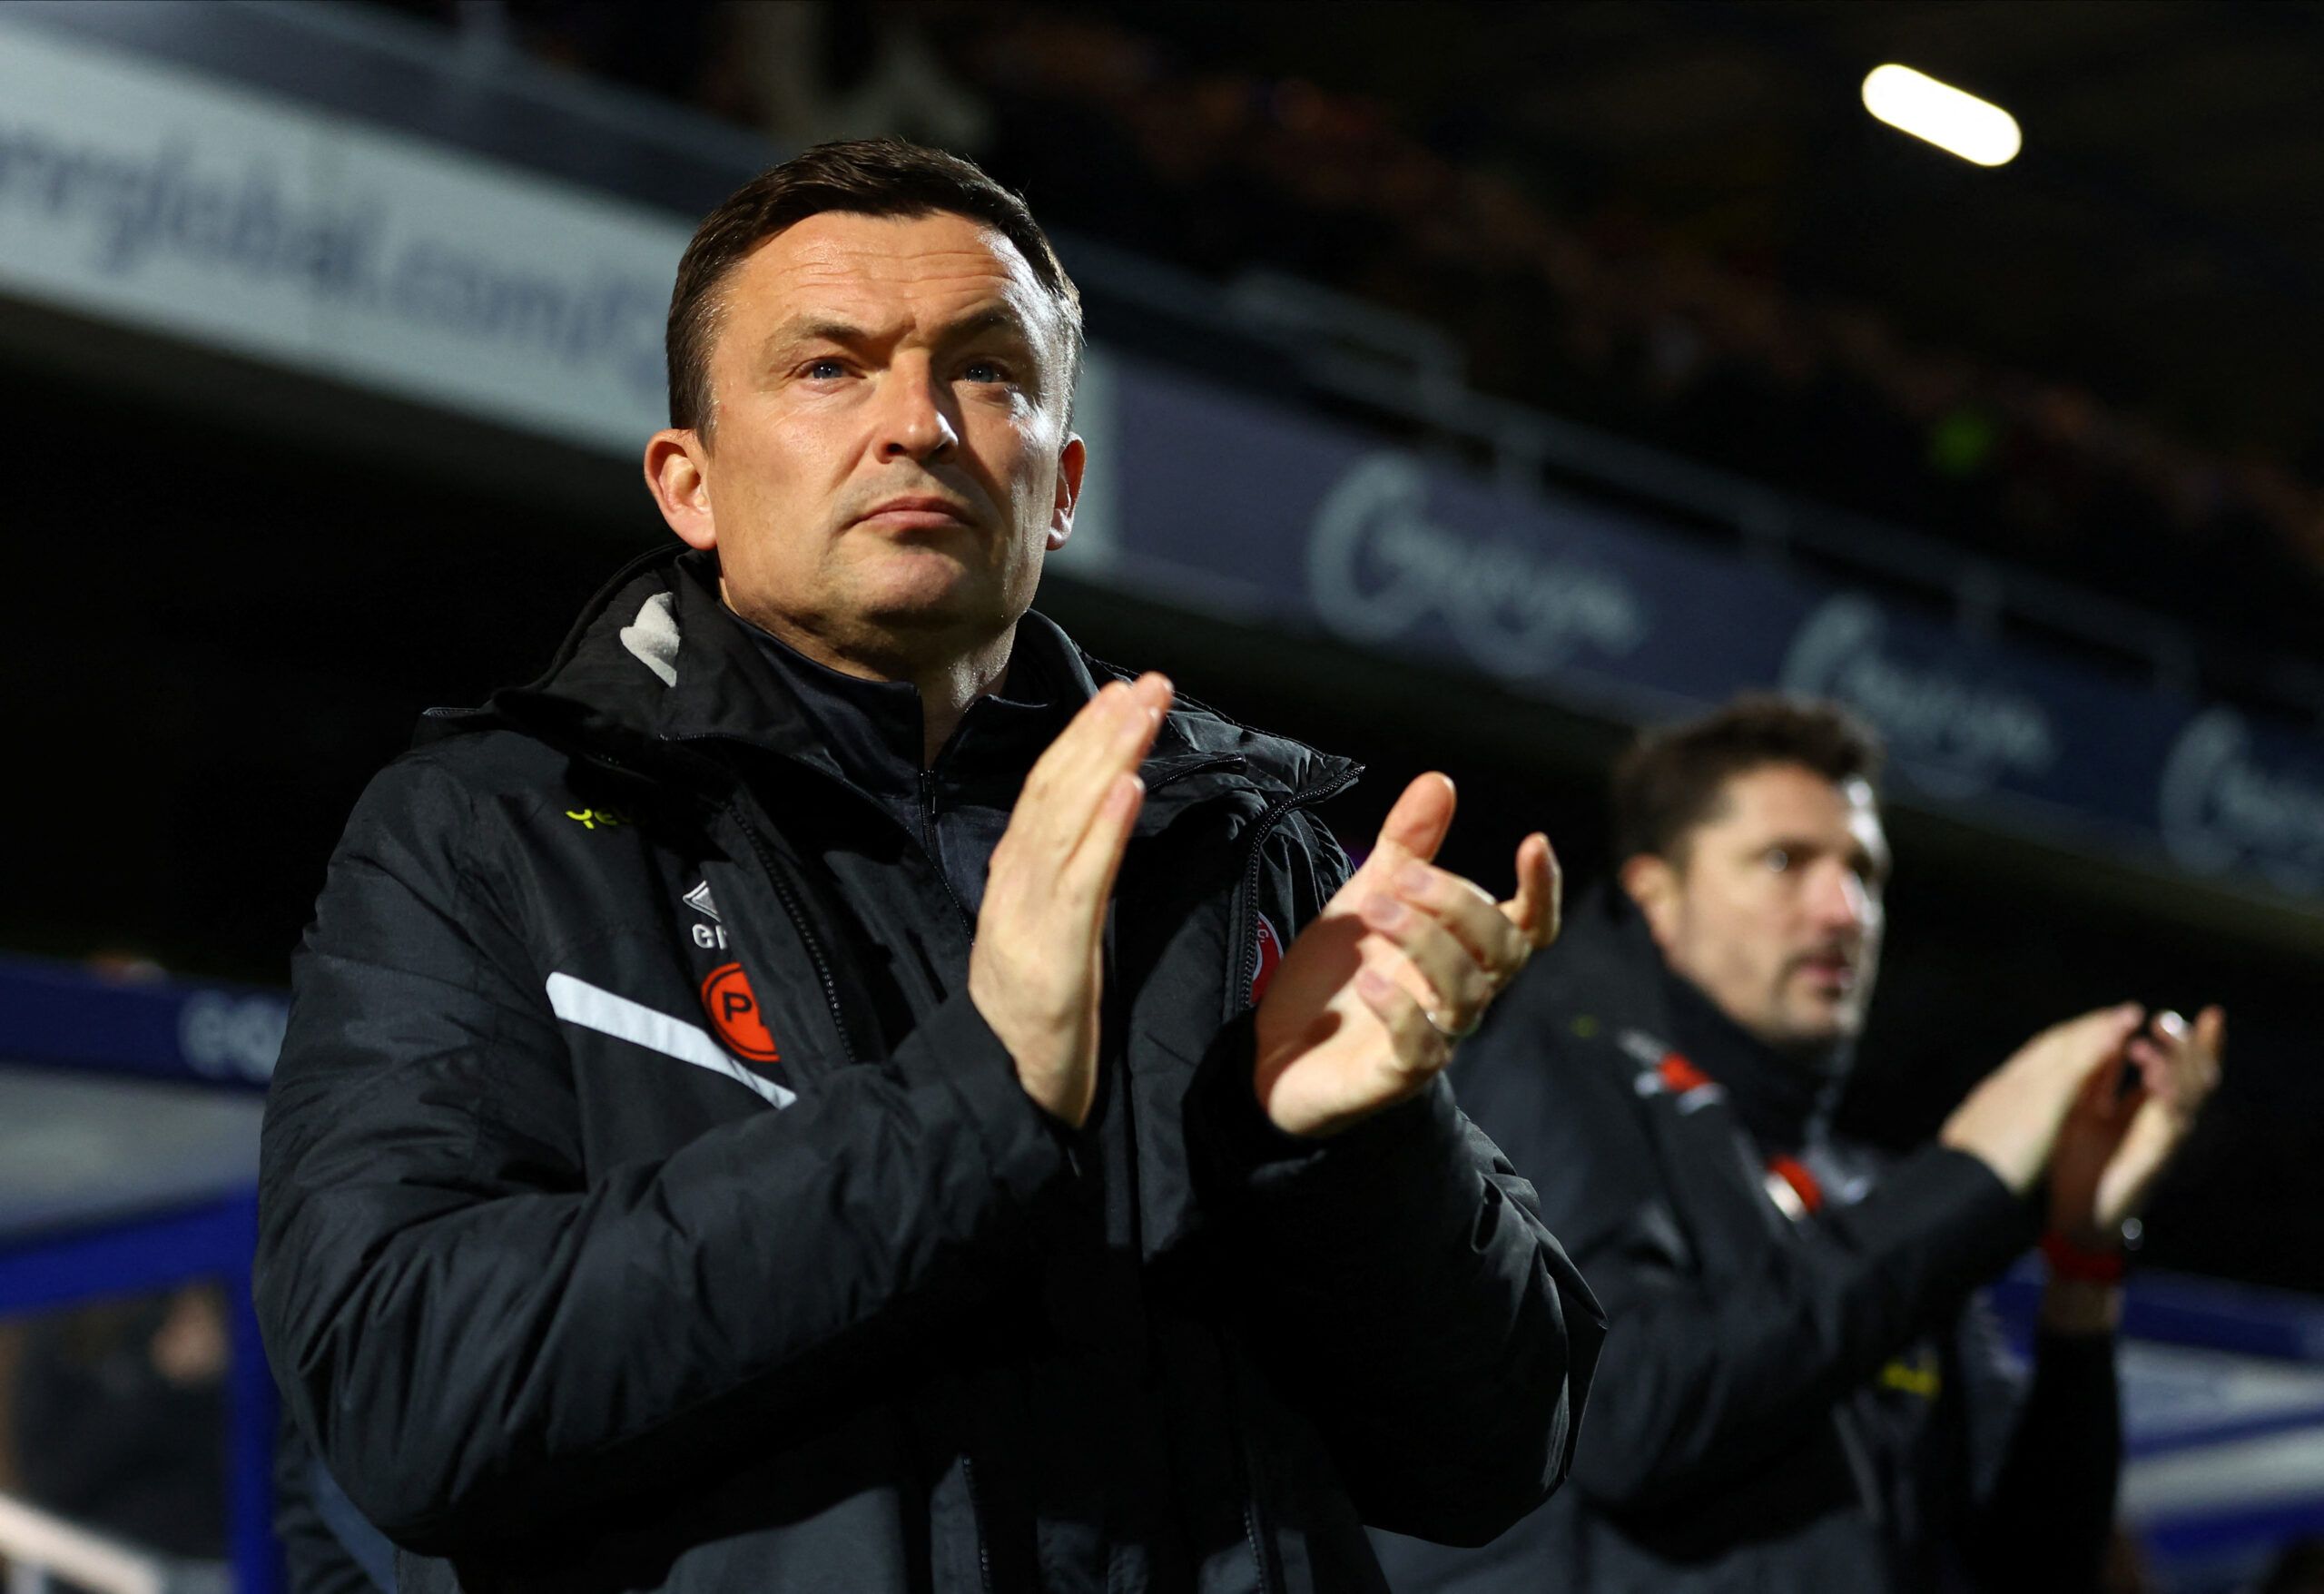 Soccer Football - Championship - Queens Park Rangers v Sheffield United - Loftus Road, London, Britain - January 2, 2023  Sheffield United manager Paul Heckingbottom before the match  Action Images/Paul Childs  EDITORIAL USE ONLY. No use with unauthorized audio, video, data, fixture lists, club/league logos or 